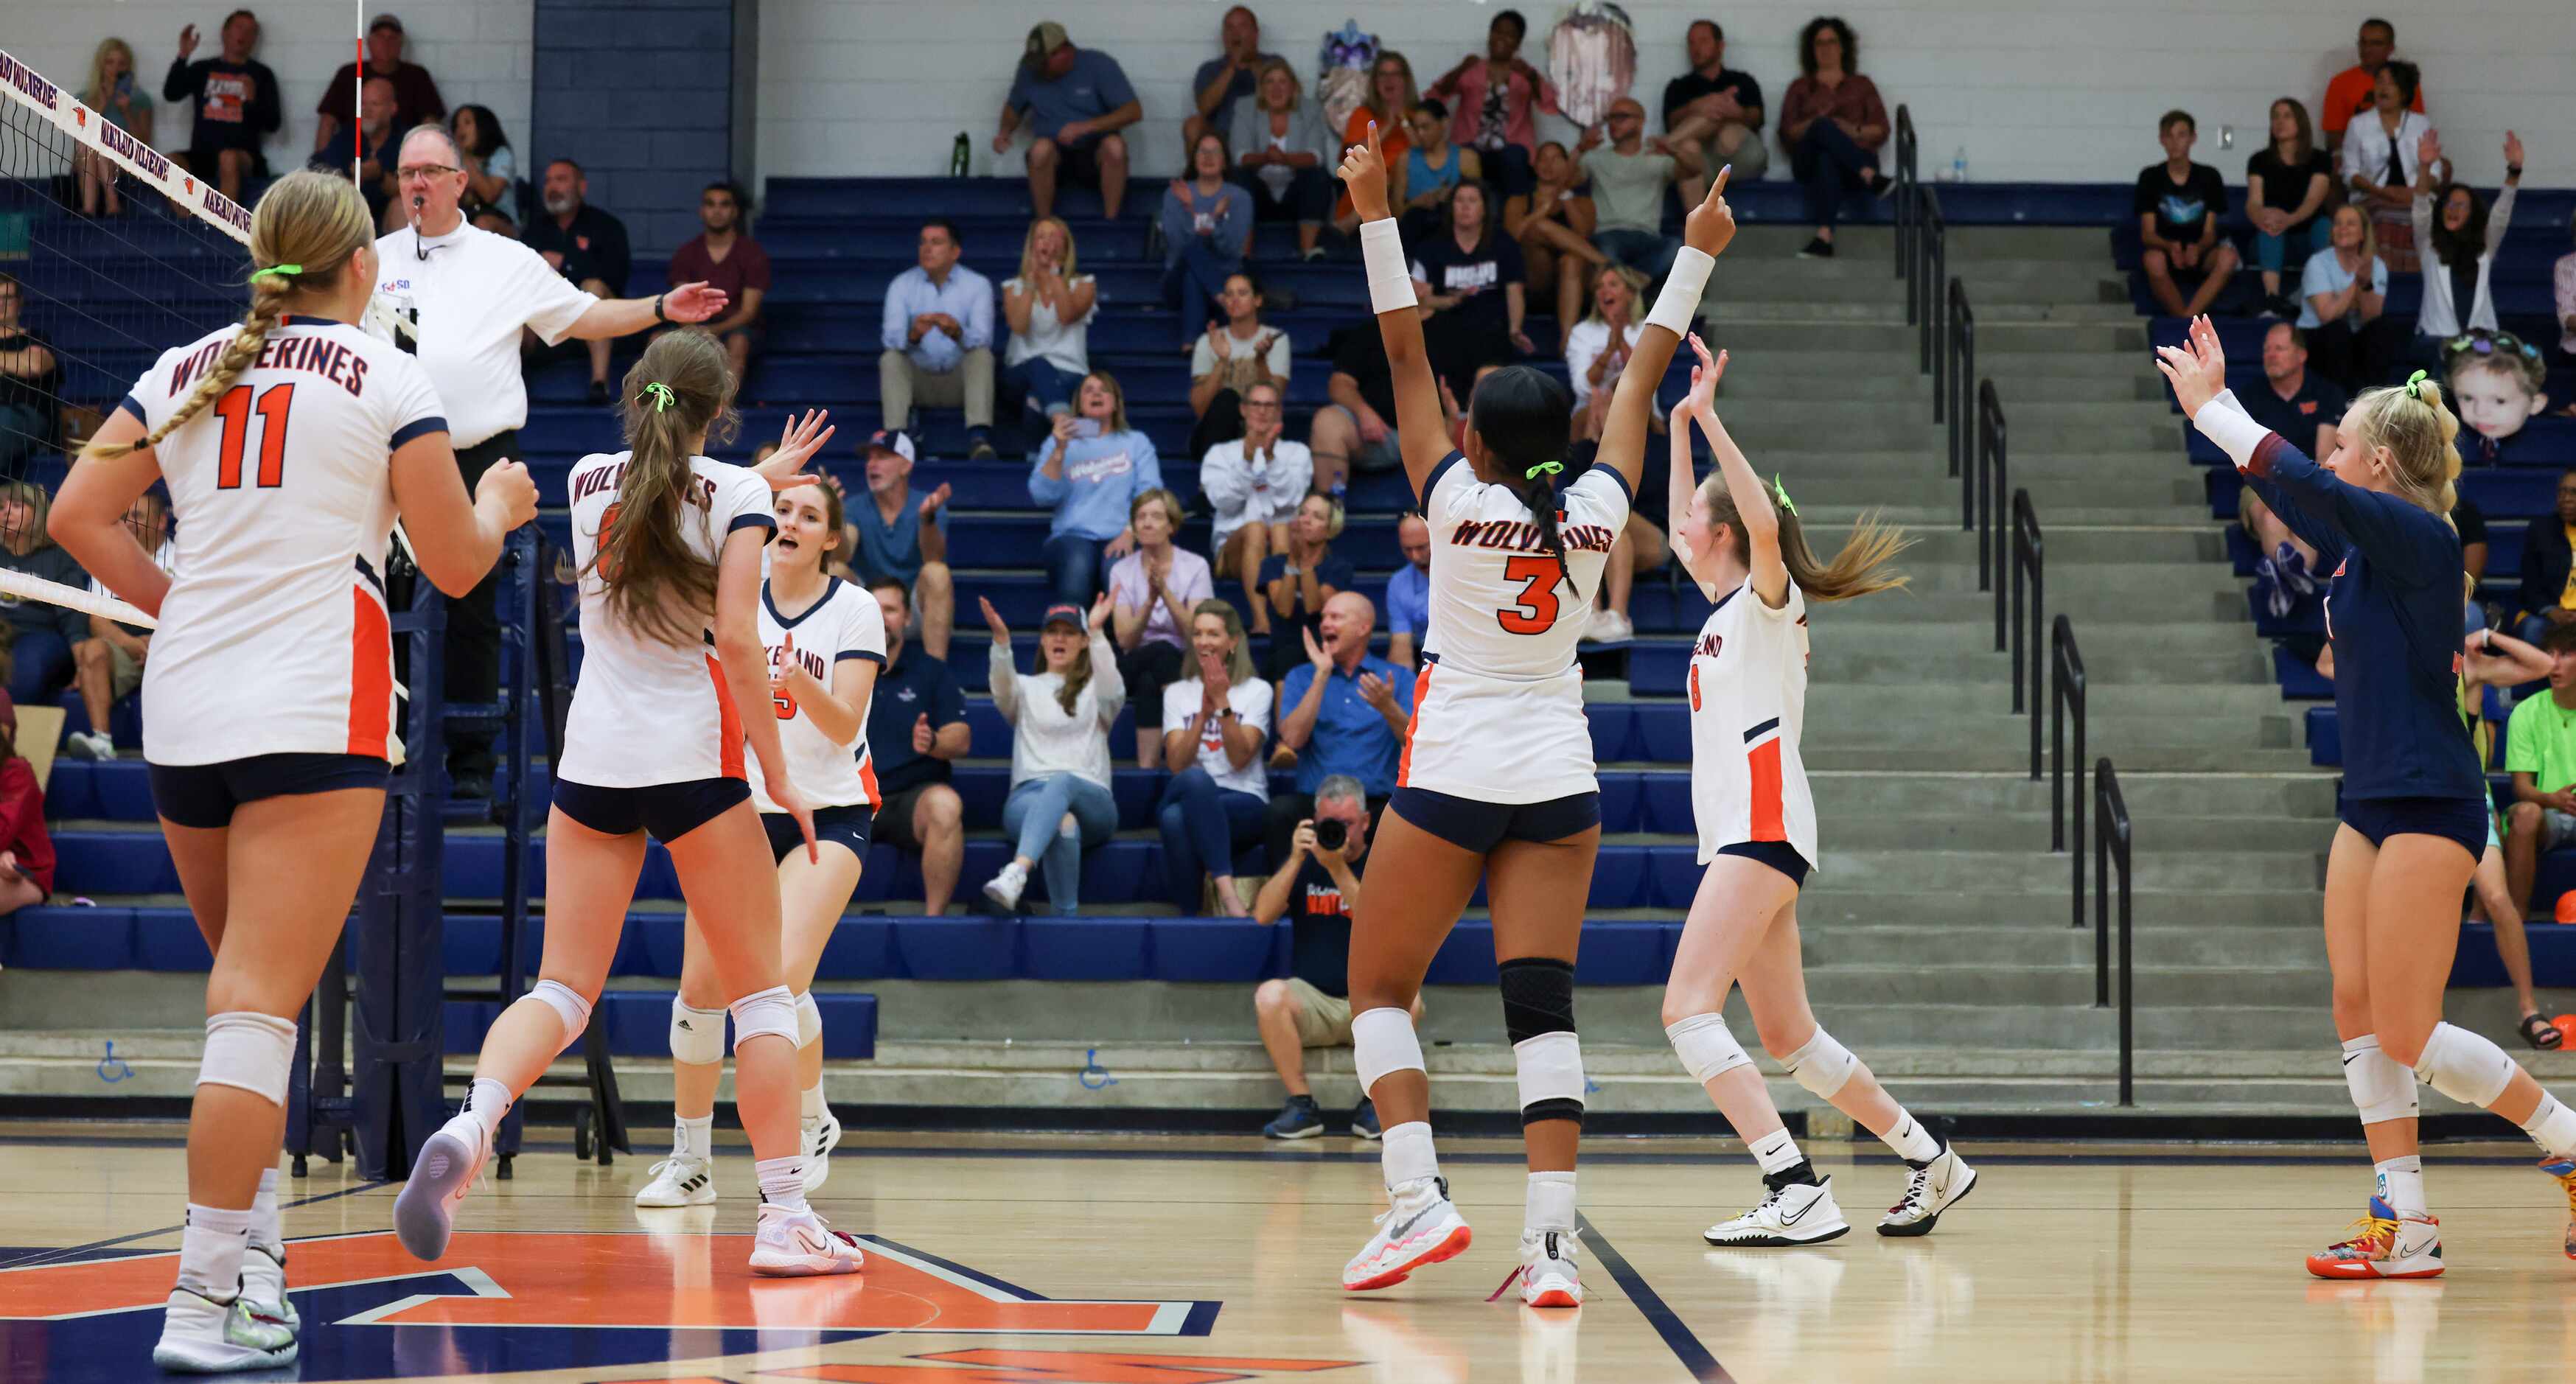 Frisco ISD’s Wakeland High School volleyball team celebrates their win after the third set...